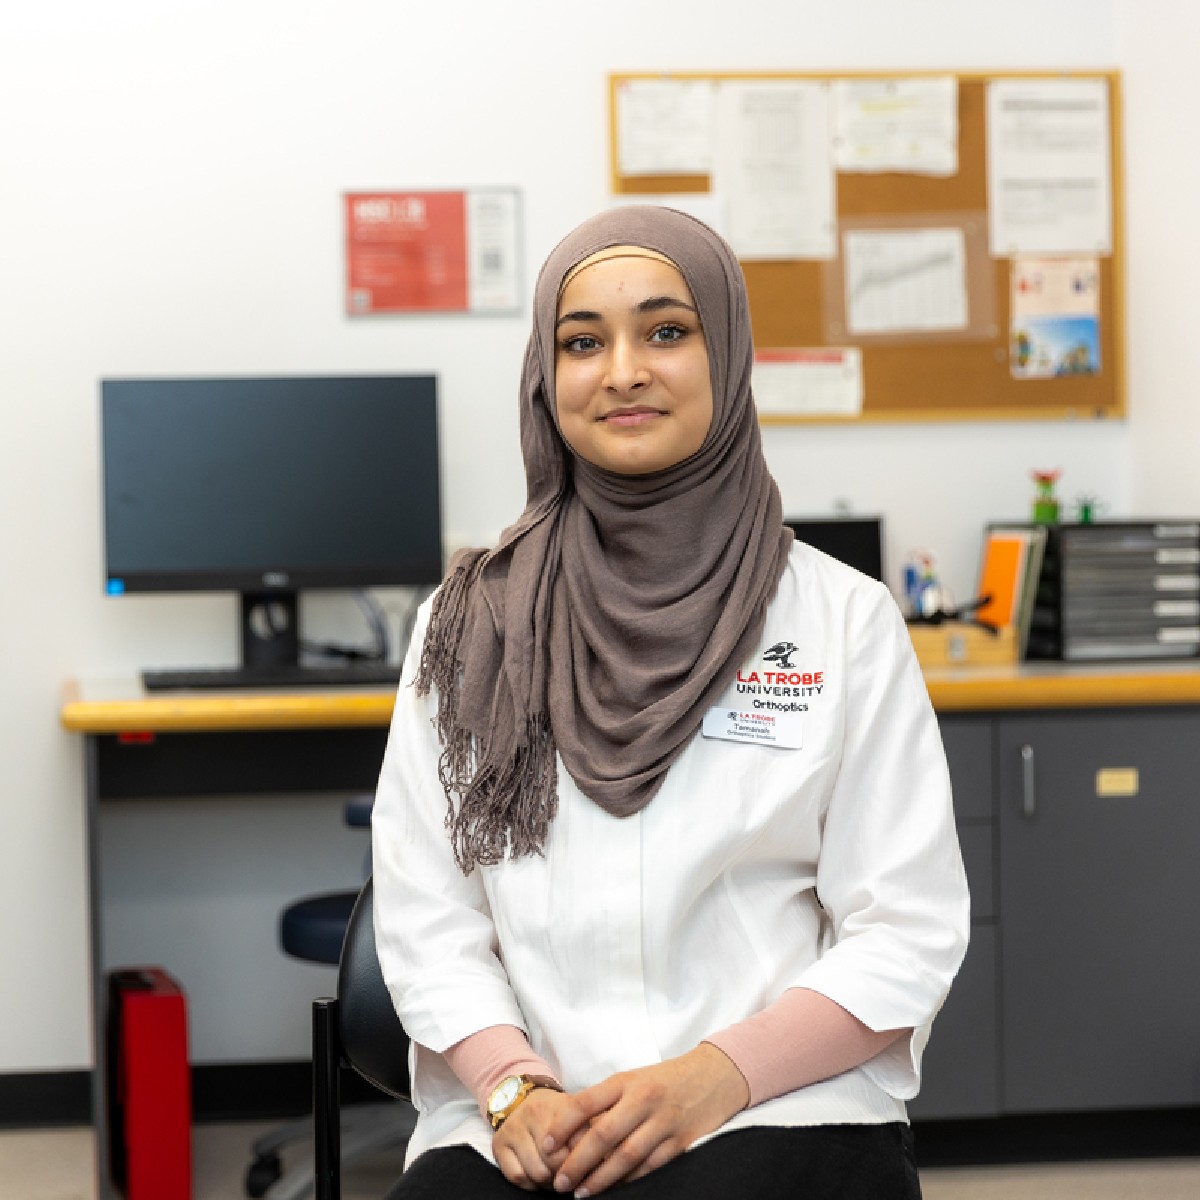 'I don't think I would have gone to university without the scholarship. It’s made me happy, it’s made my family happy, it’s become a beacon of hope for us.' Tamanah's story demonstrates the life-changing impact of the La Trobe Scholarship Fund: now.latrobe/3ysXigv